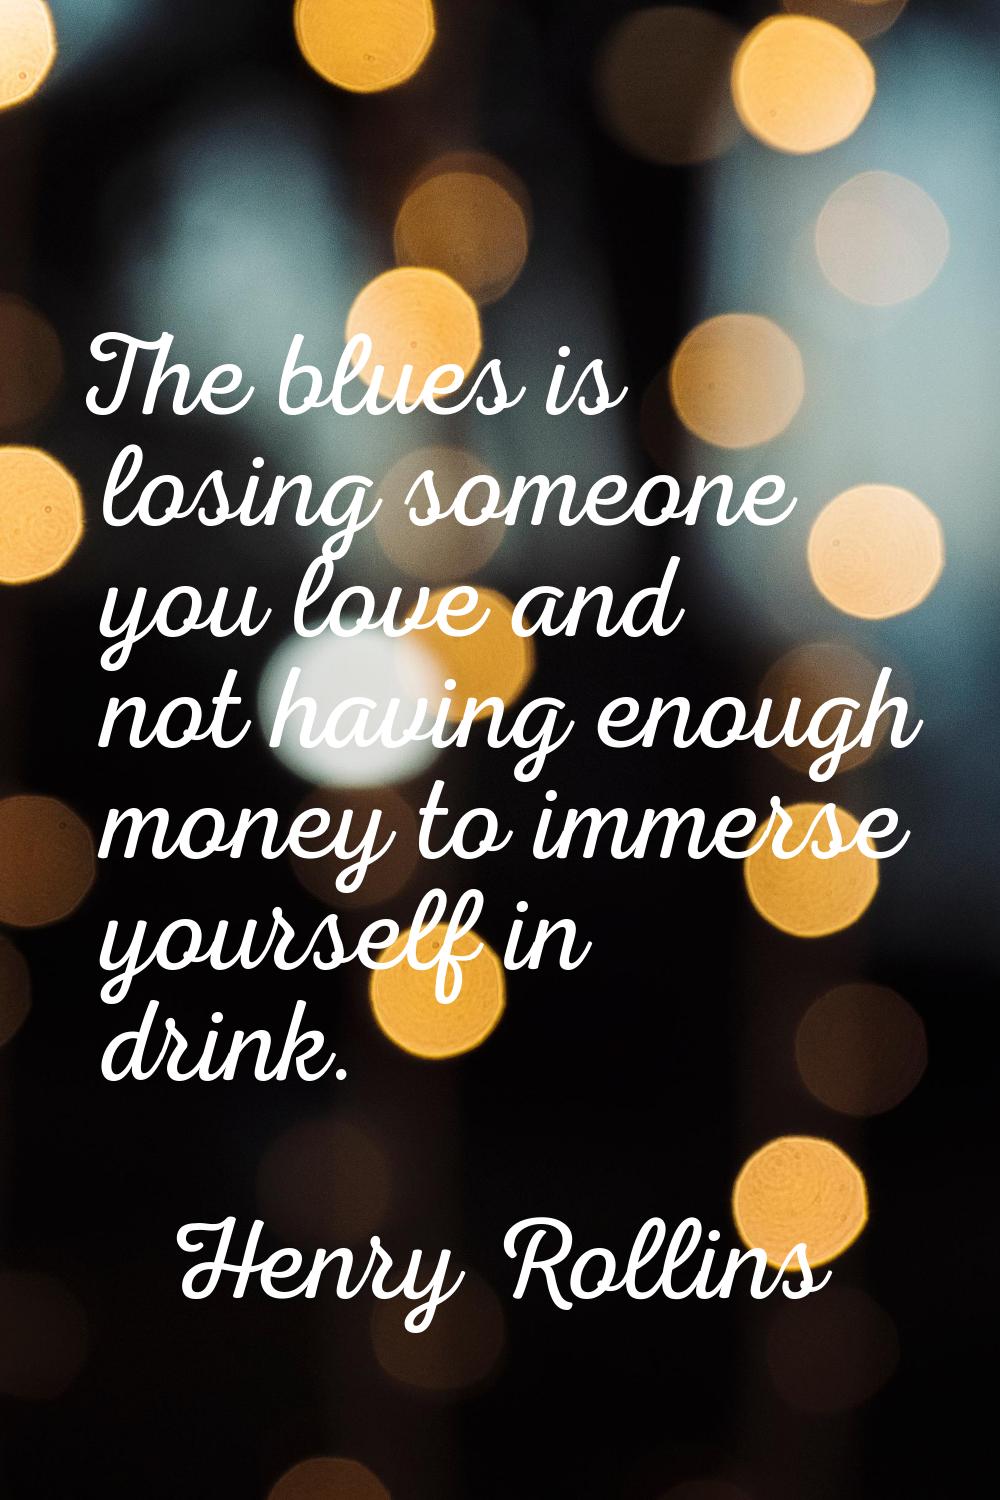 The blues is losing someone you love and not having enough money to immerse yourself in drink.